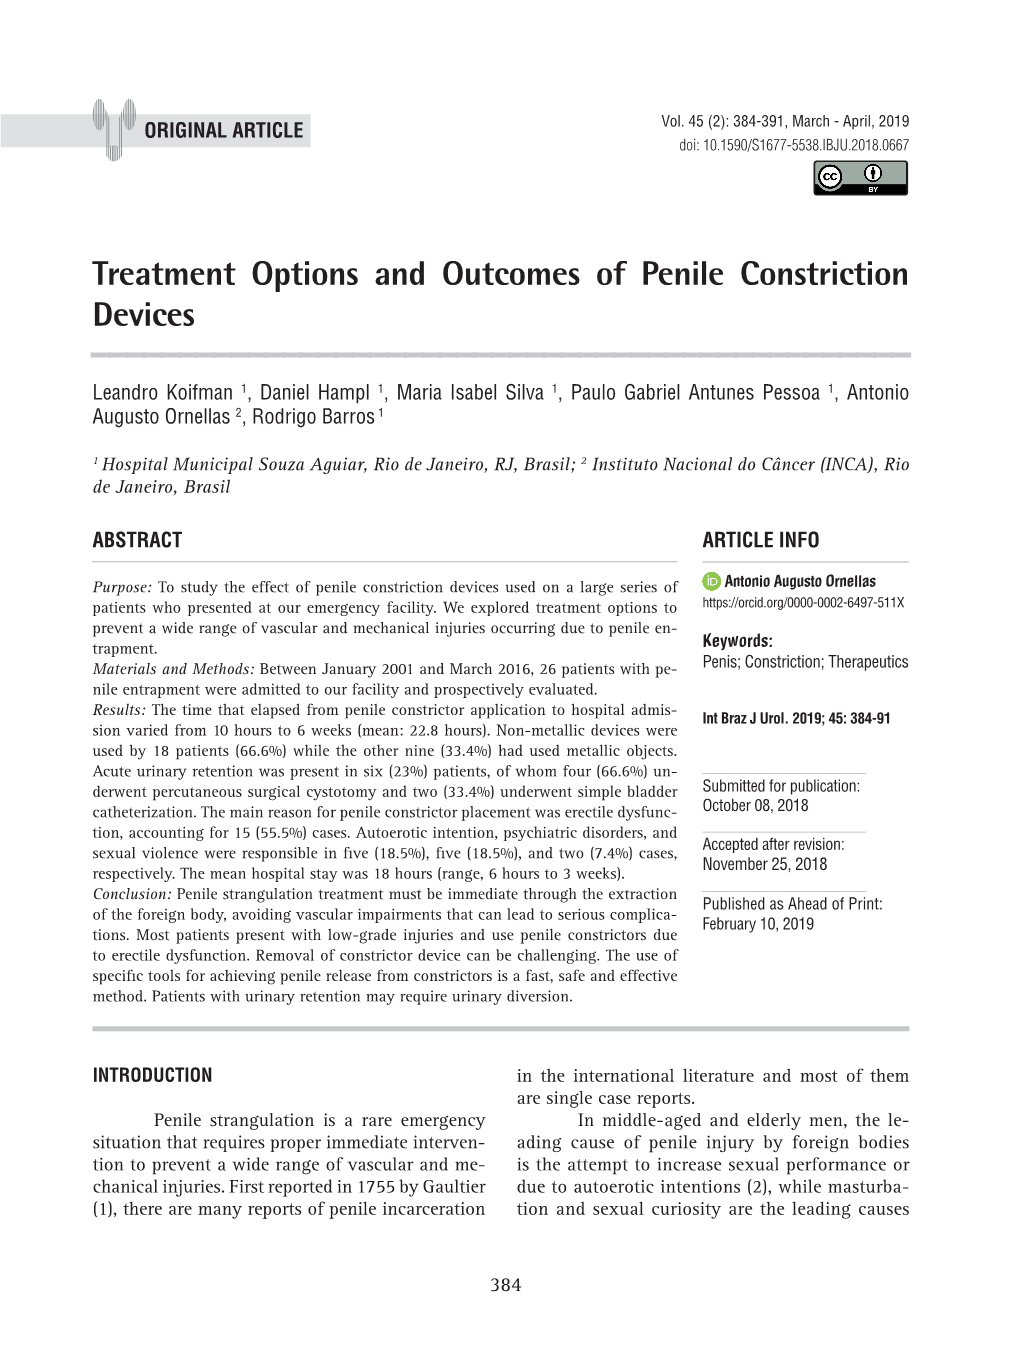 Treatment Options and Outcomes of Penile Constriction Devices ______